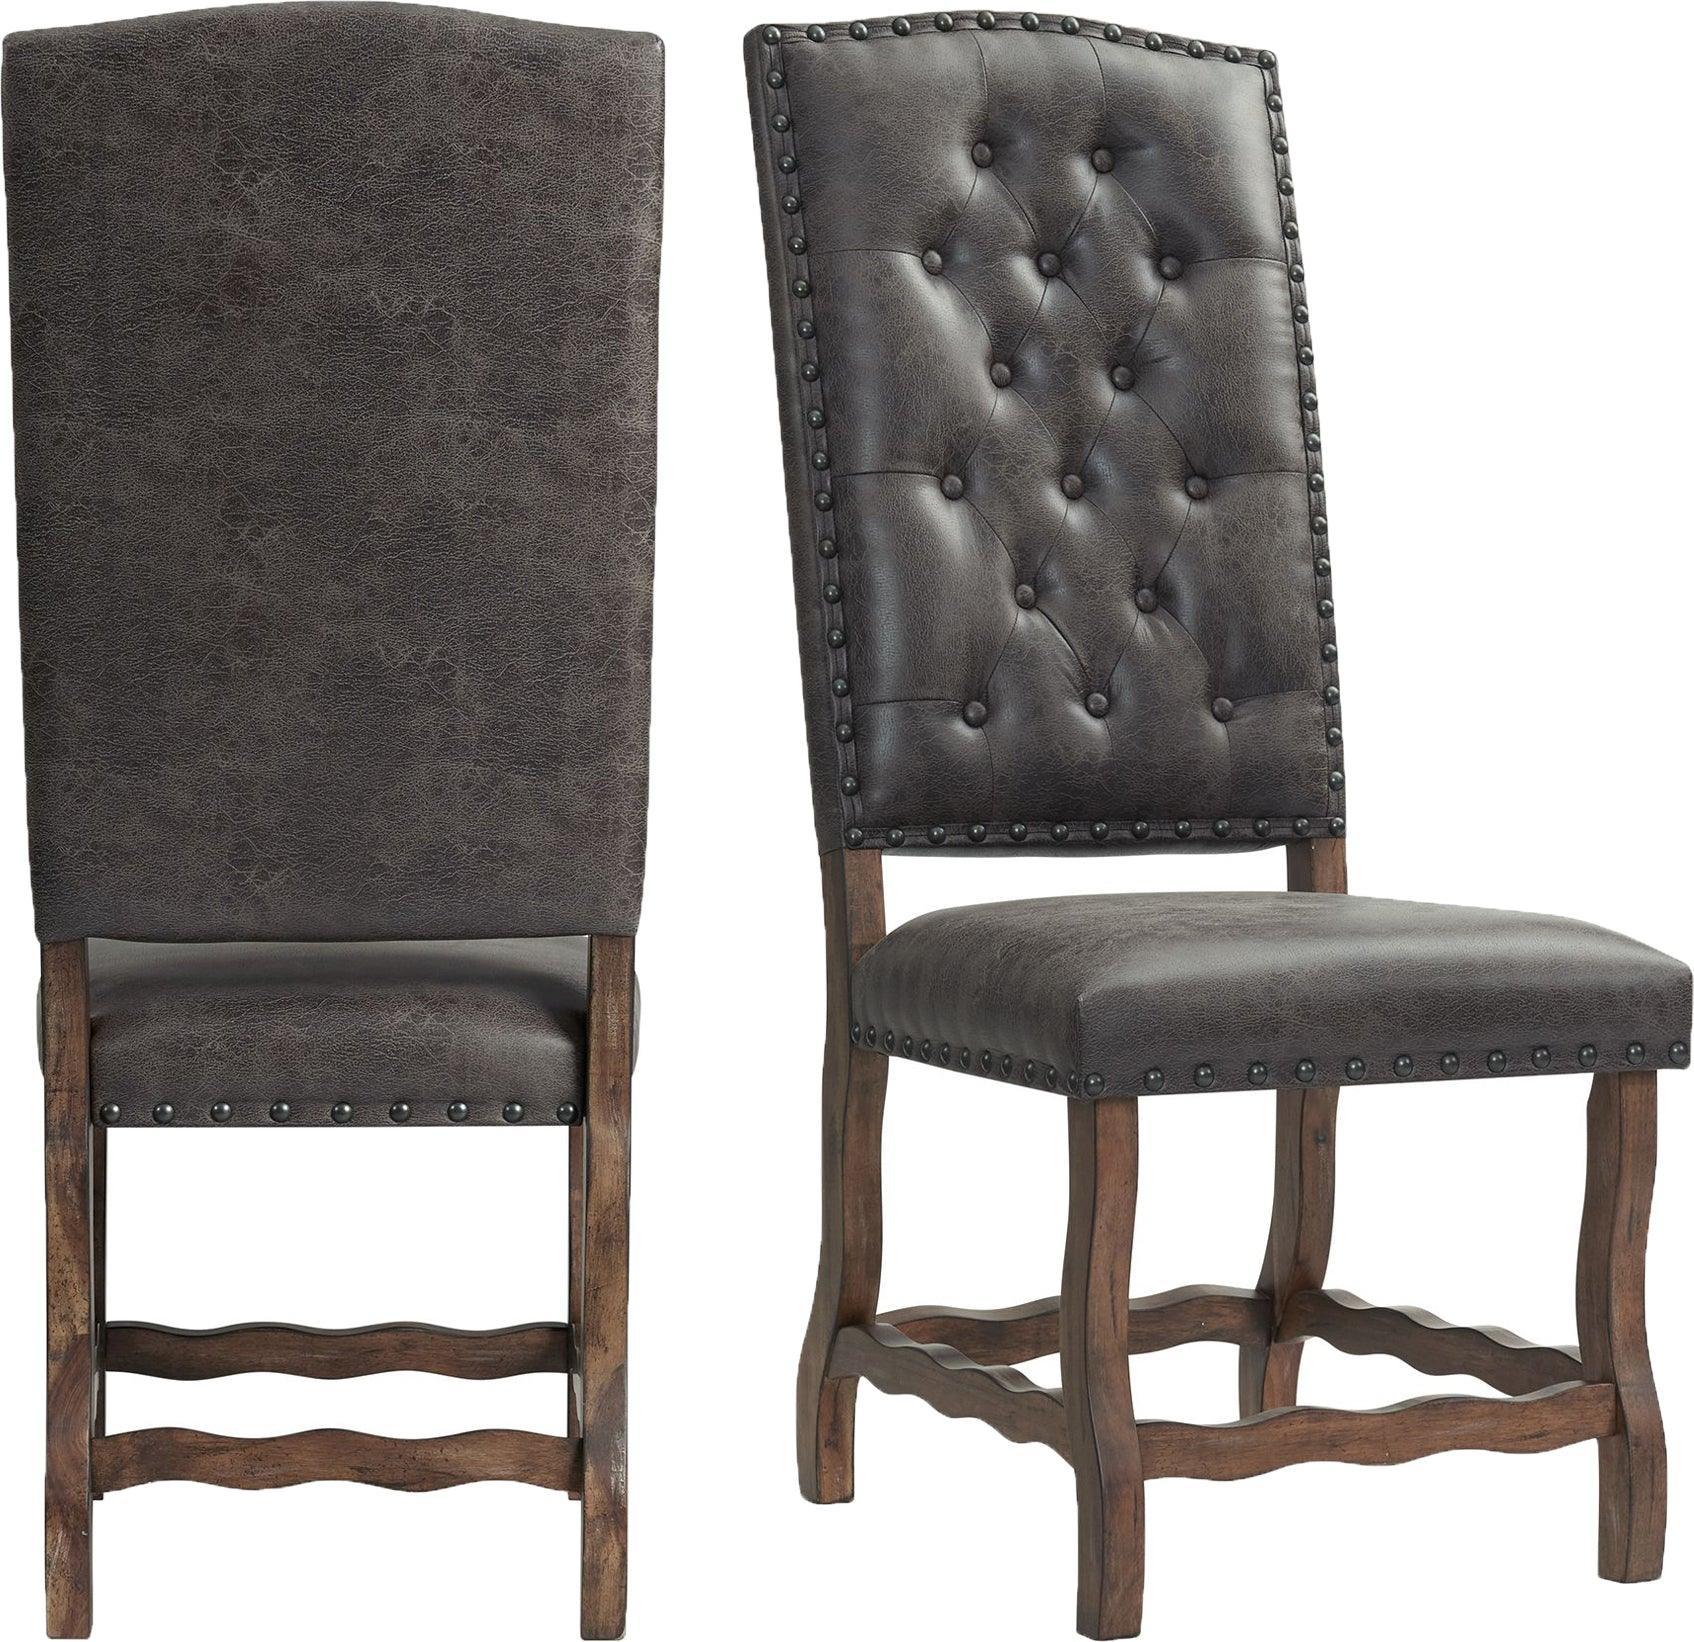 Elements Dining Chairs - Hayward Tufted Tall Back Side Chair Set (Set of 2)